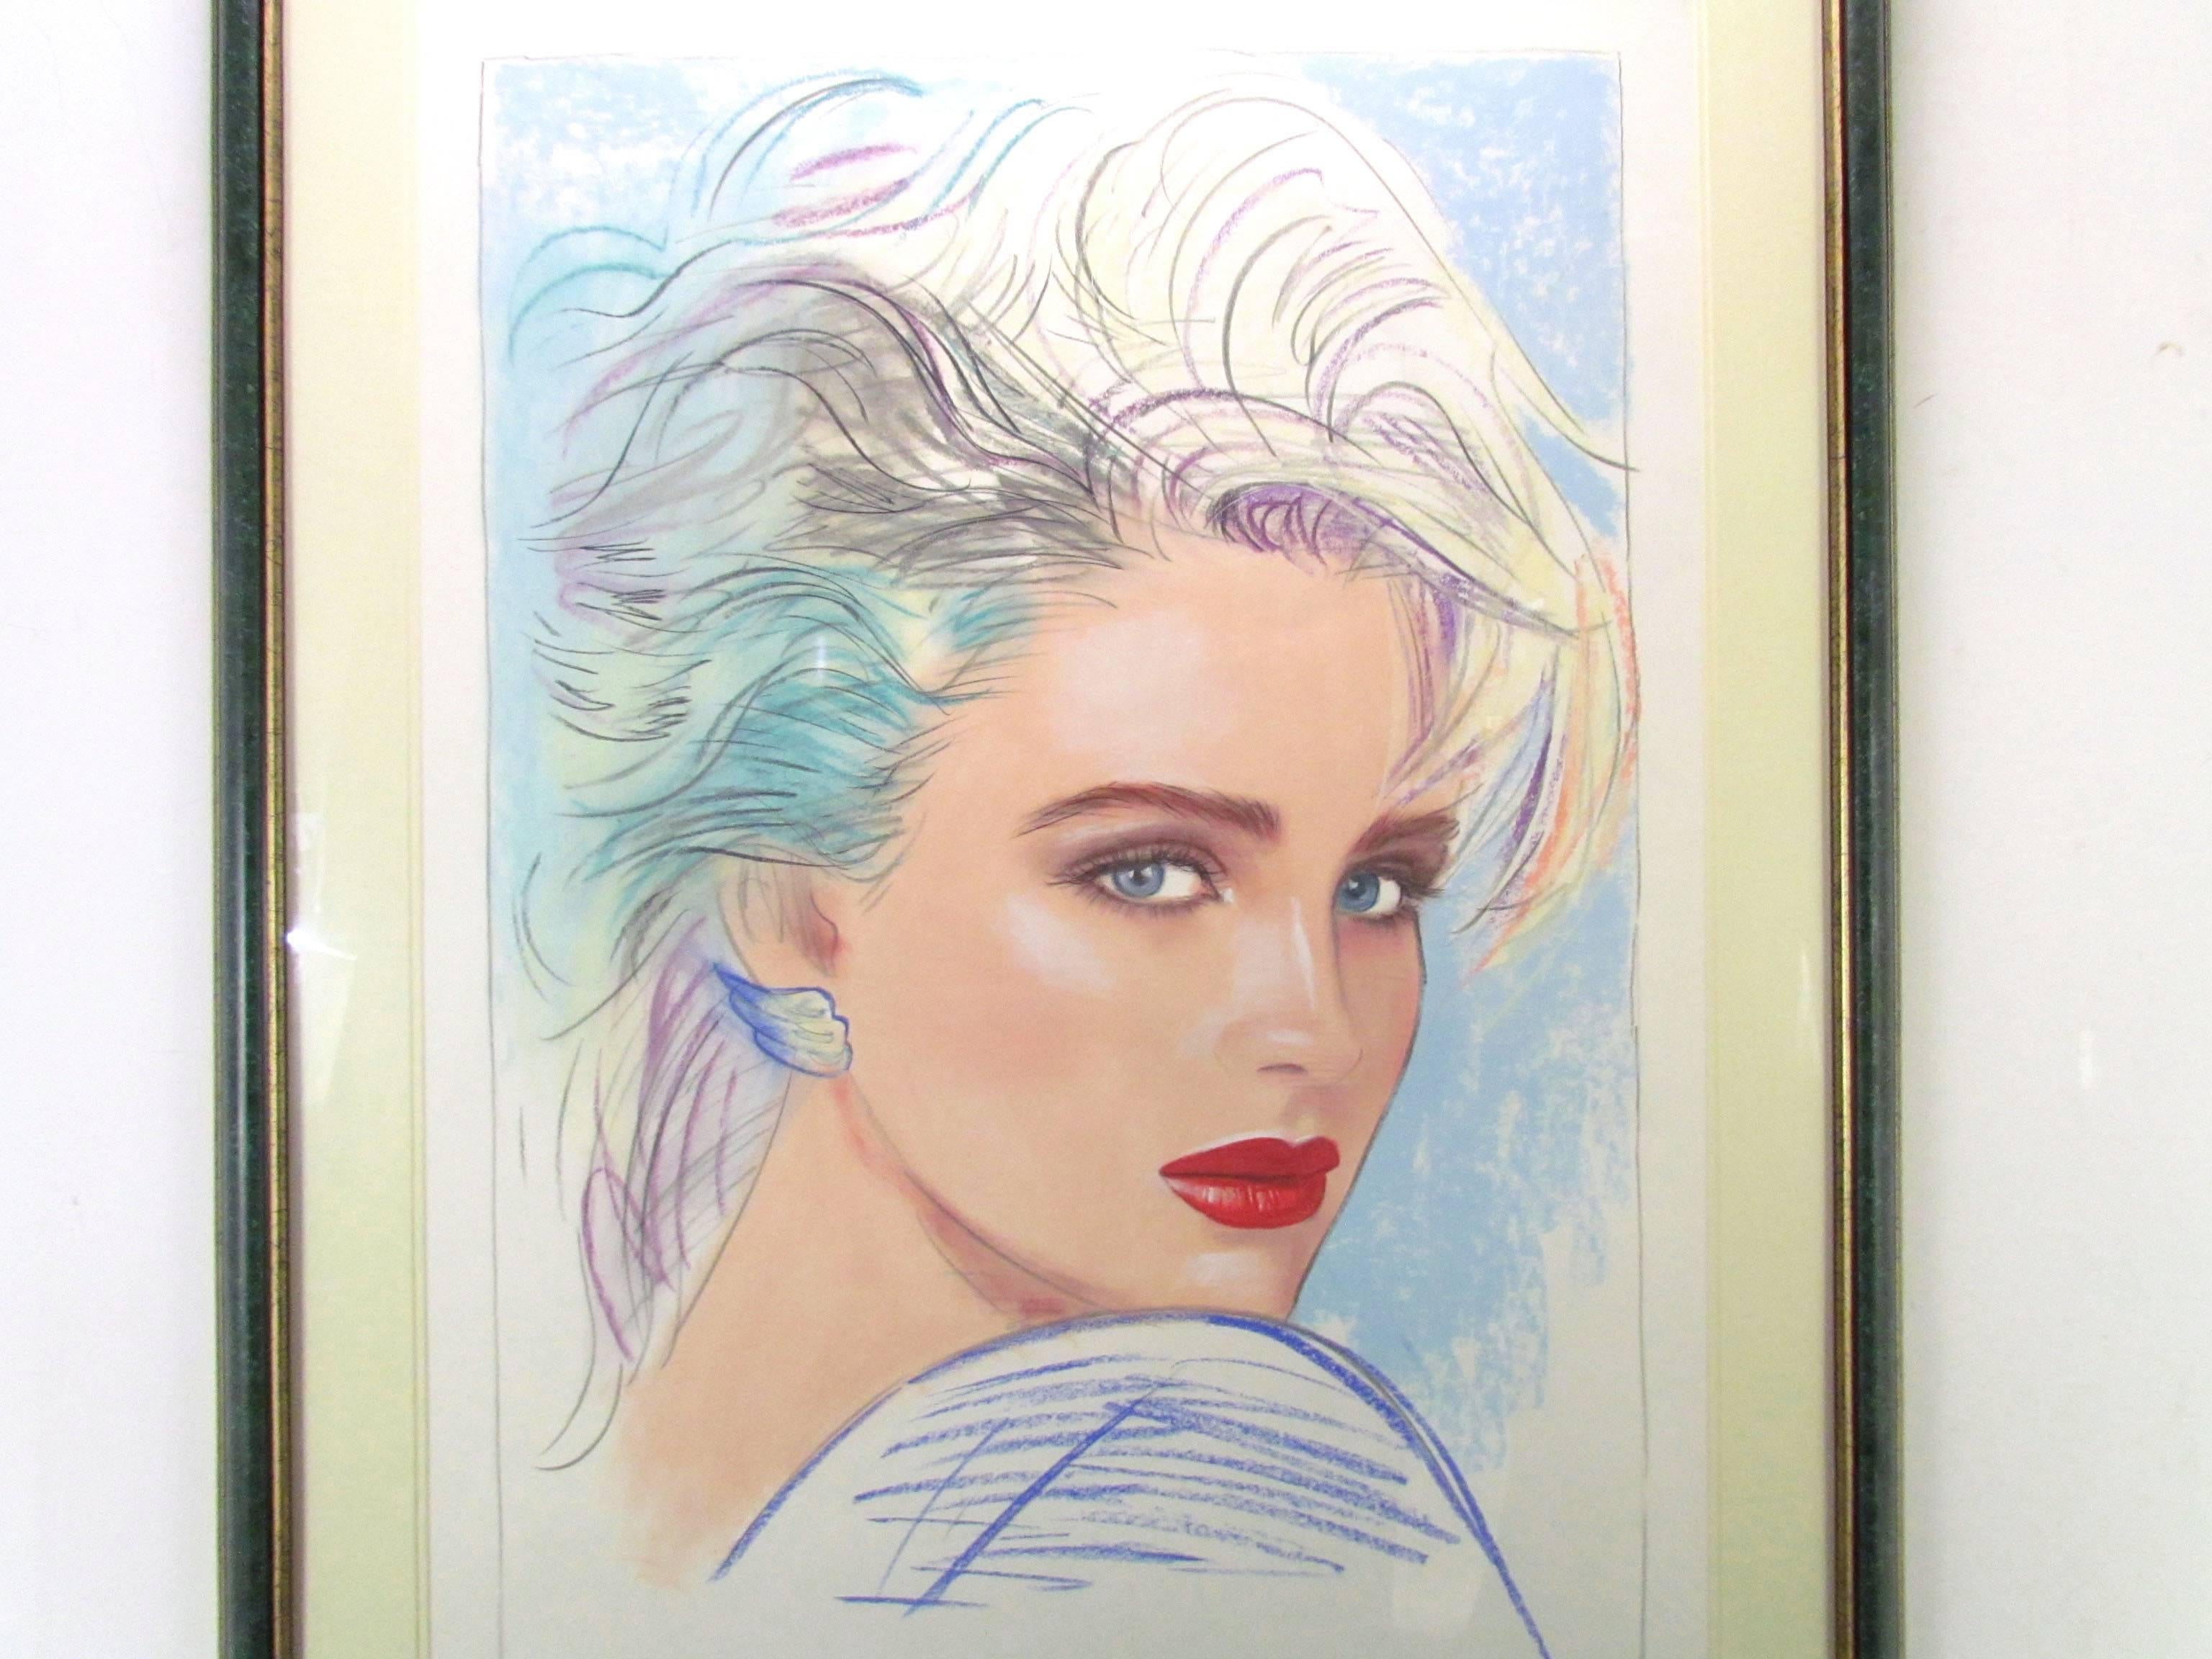 Original pastel painting by listed Japanese artist Pater Sato, who frequently produced illustrations for Playboy in the early 1990s. The work appeared in the May 1993 issue.  In original period frame.